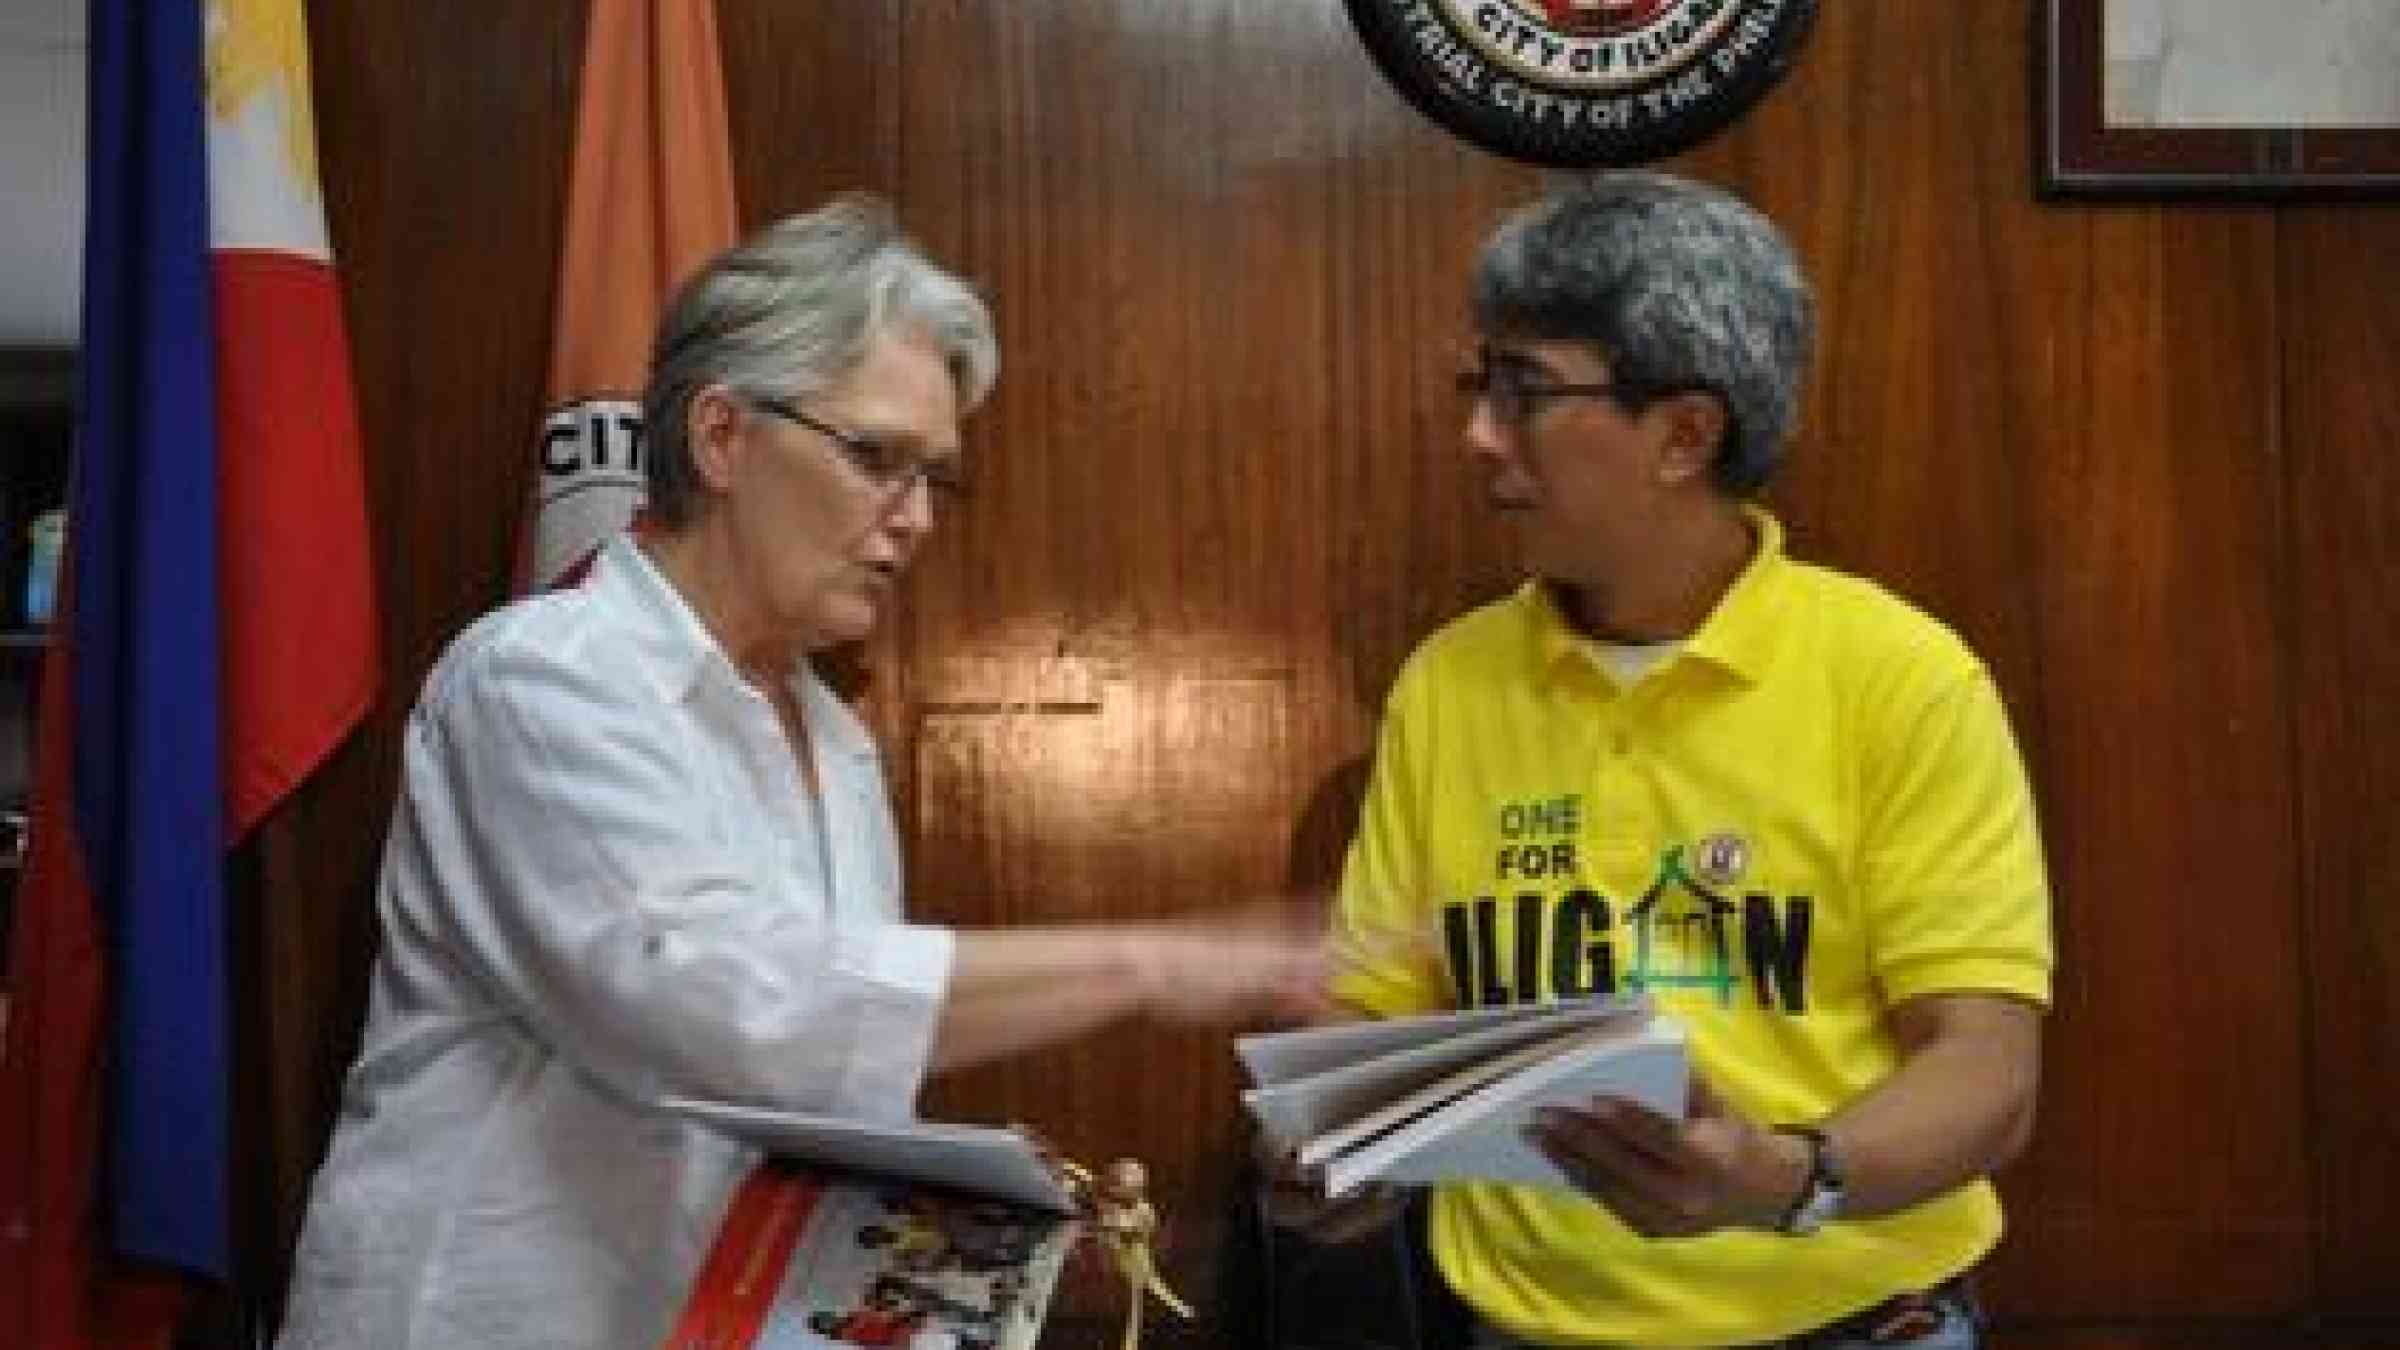 Special Representative for Disaster Risk Reduction Margareta Wahlstrom meets with Iligan Mayor Lawrence Lluch Cruz on her three-day visit to the Philippines. (Photo: Jerry Velasquez)